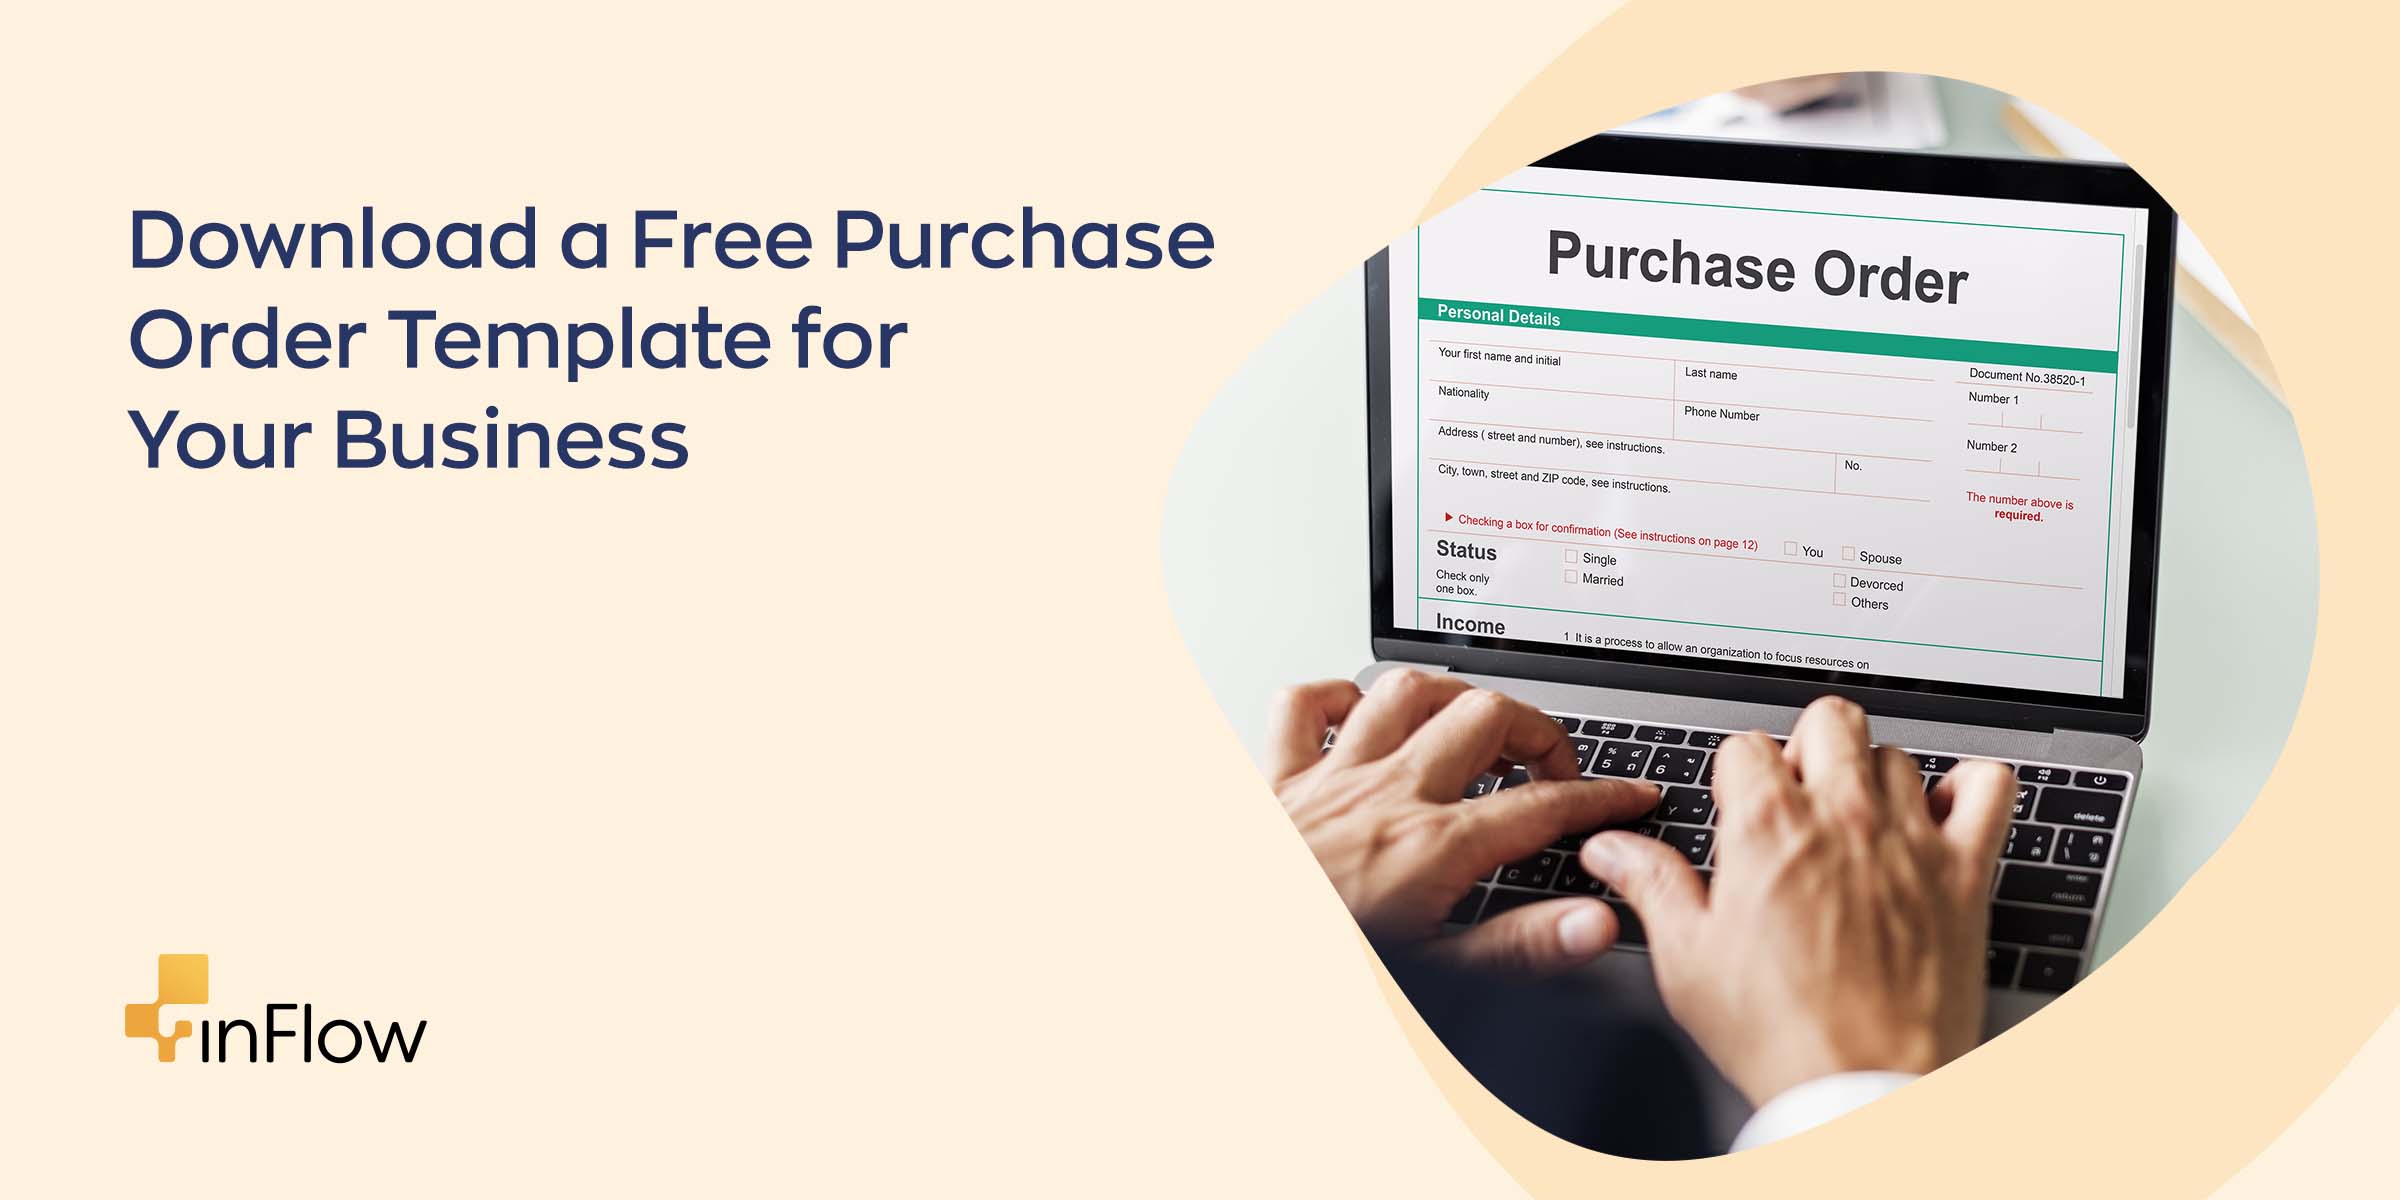 Download a Free Purchase Order Template for Your Business